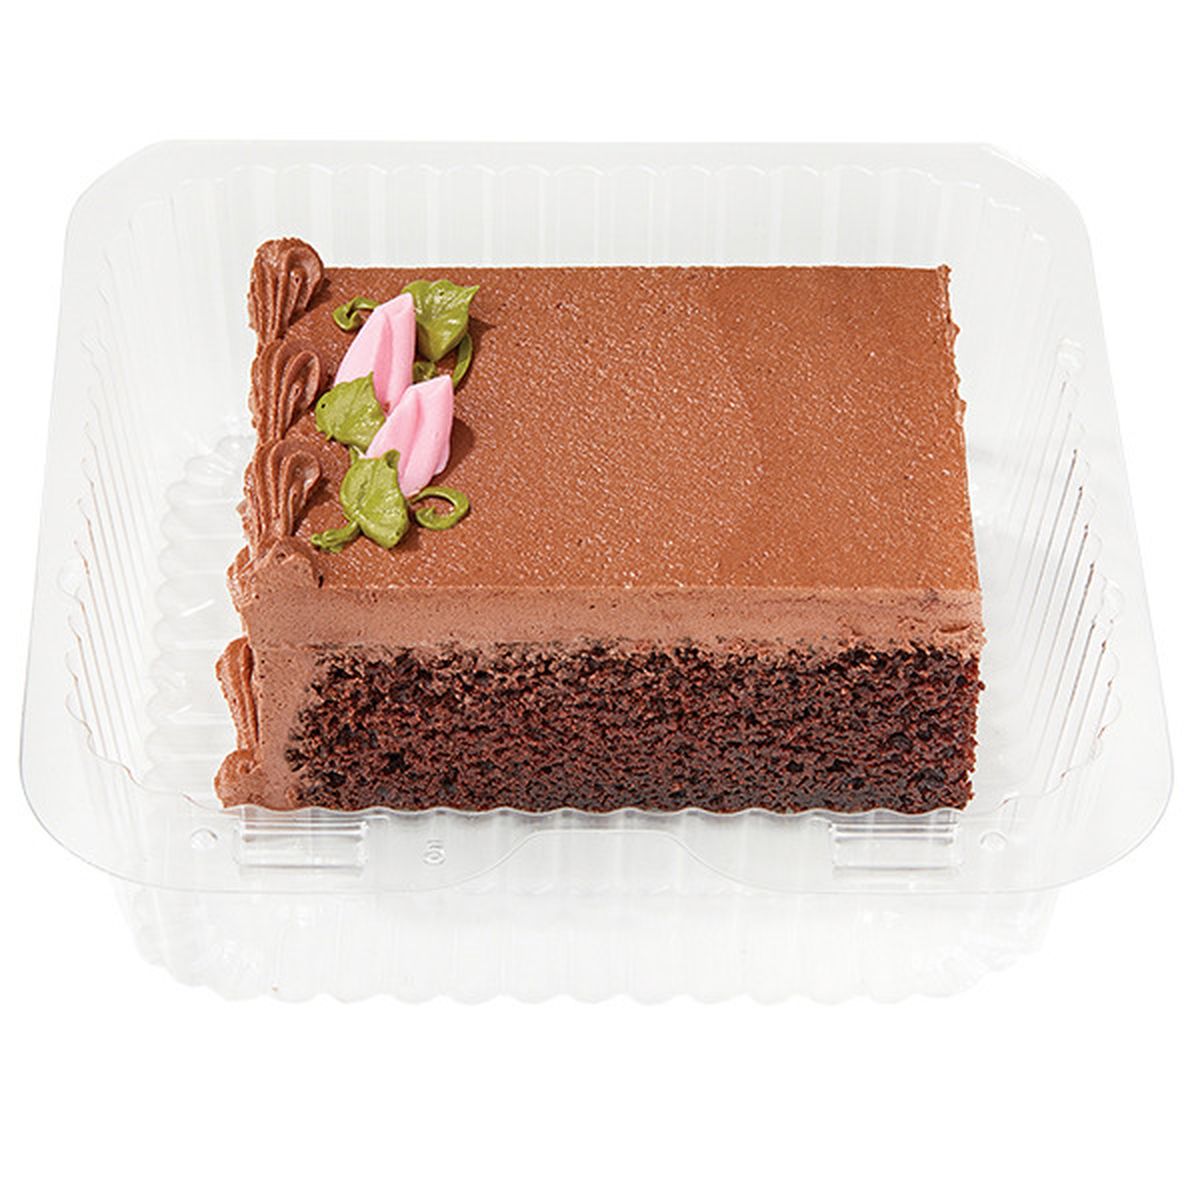 Calories in Wegmans Made with no Gluten Containing Ingredient Chocolate Cake slice with Chocolate Buttercreme Frosting